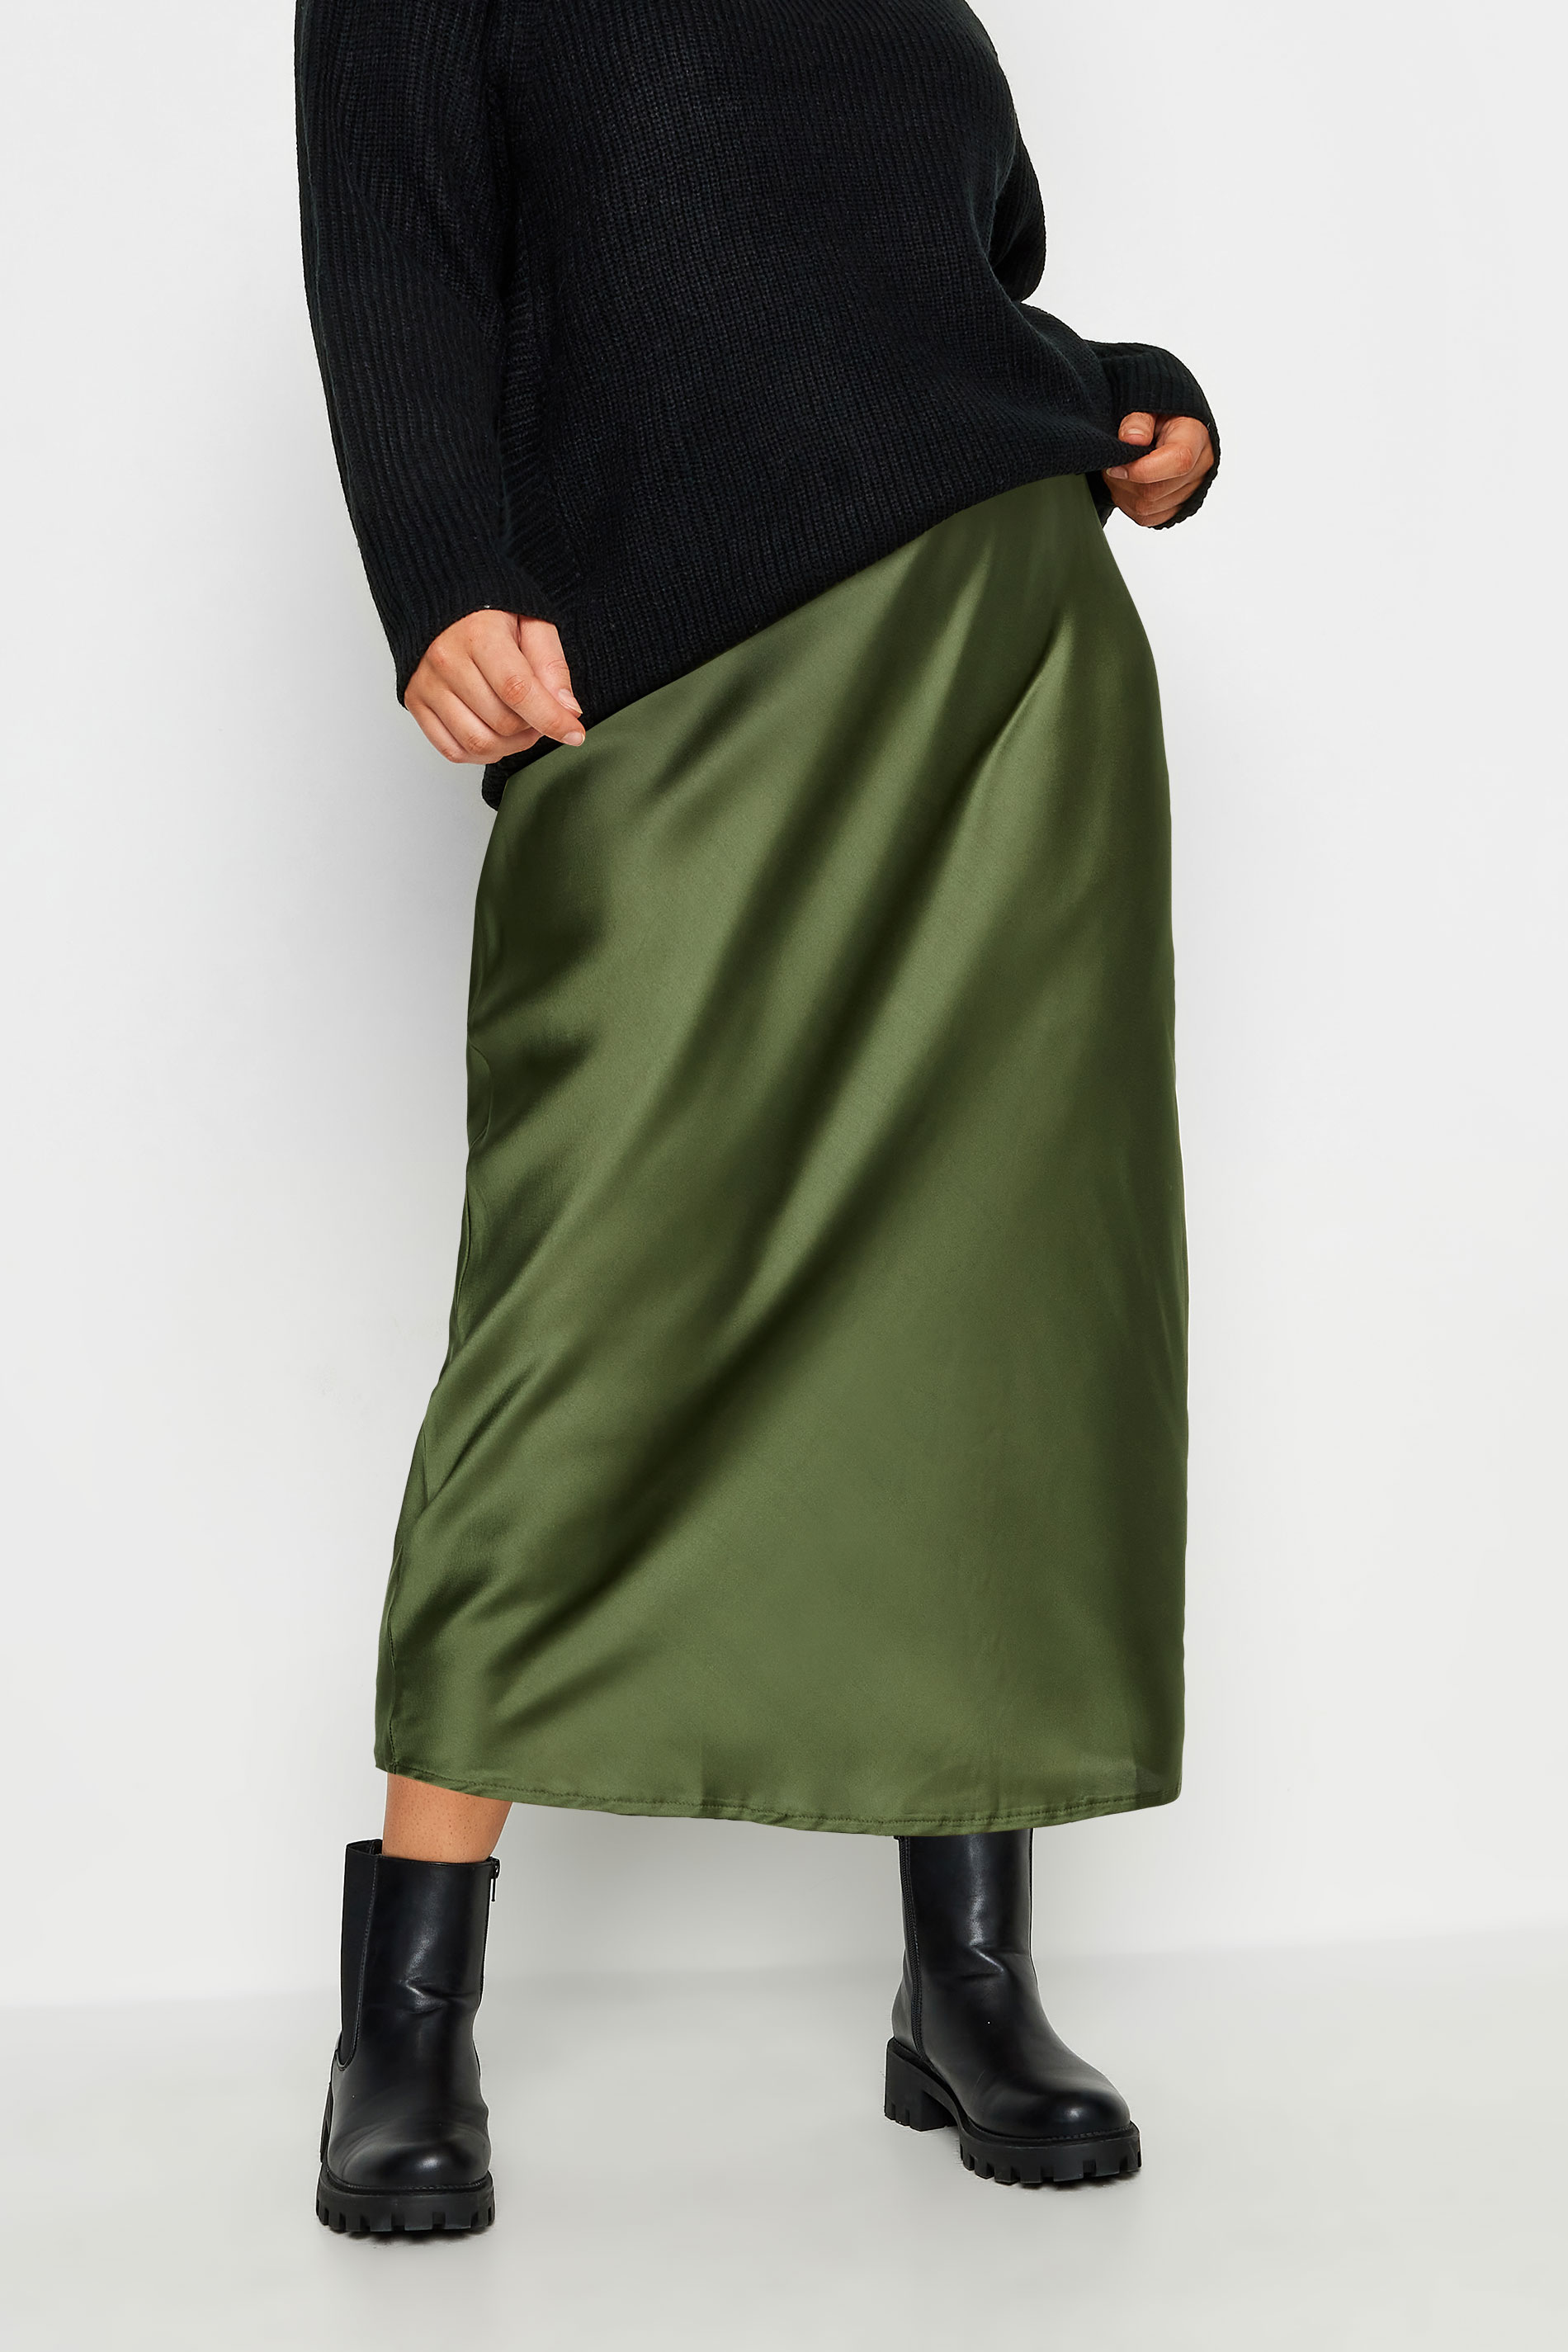 YOURS Plus Size Olive Green Satin Midi Skirt | Yours Clothing 1